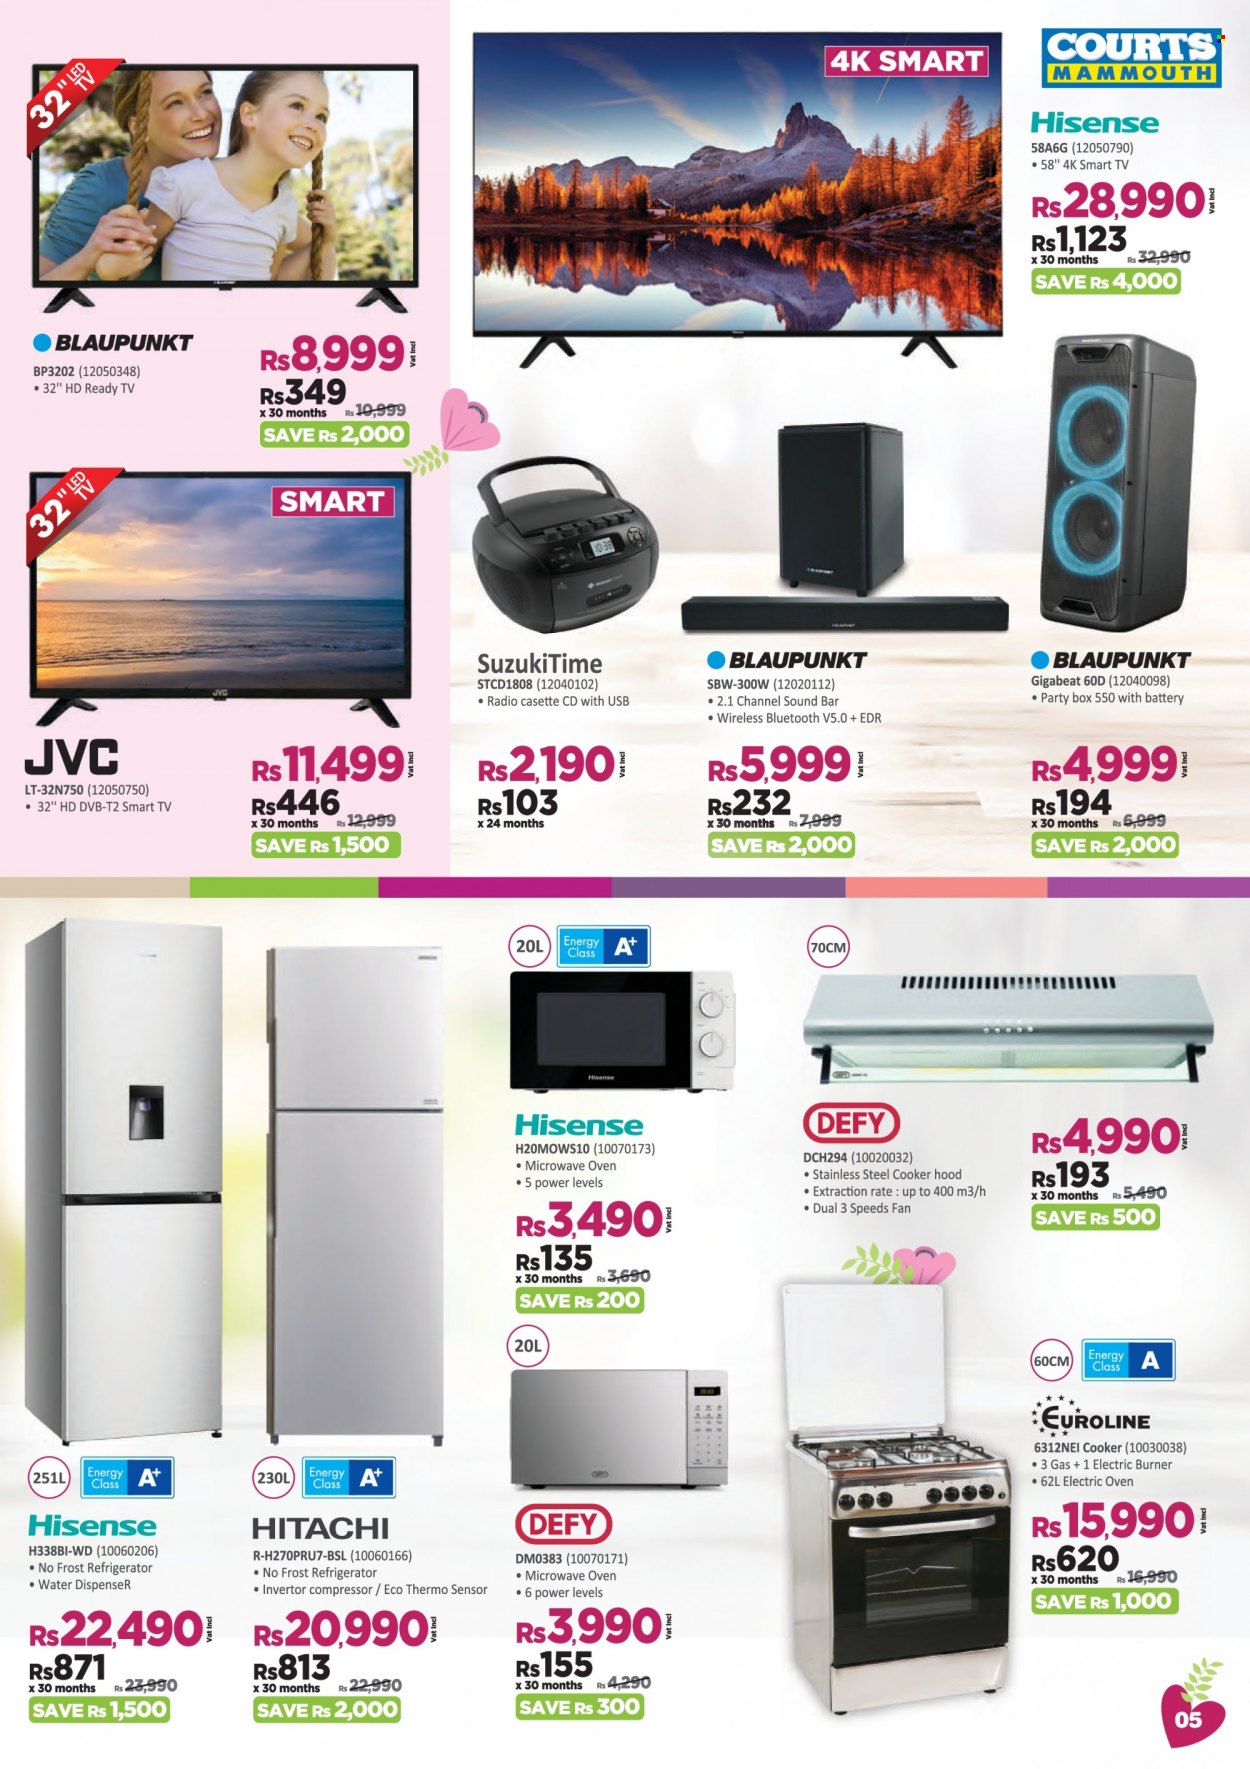 Courts Mammouth Catalogue - 1.05.2022 - 19.05.2022 - Sales products - dispenser, WD, JVC, TV, radio, sound bar, cooker hood, refrigerator, oven, microwave, Hitachi, water dispenser, smart tv, Hisense. Page 5.